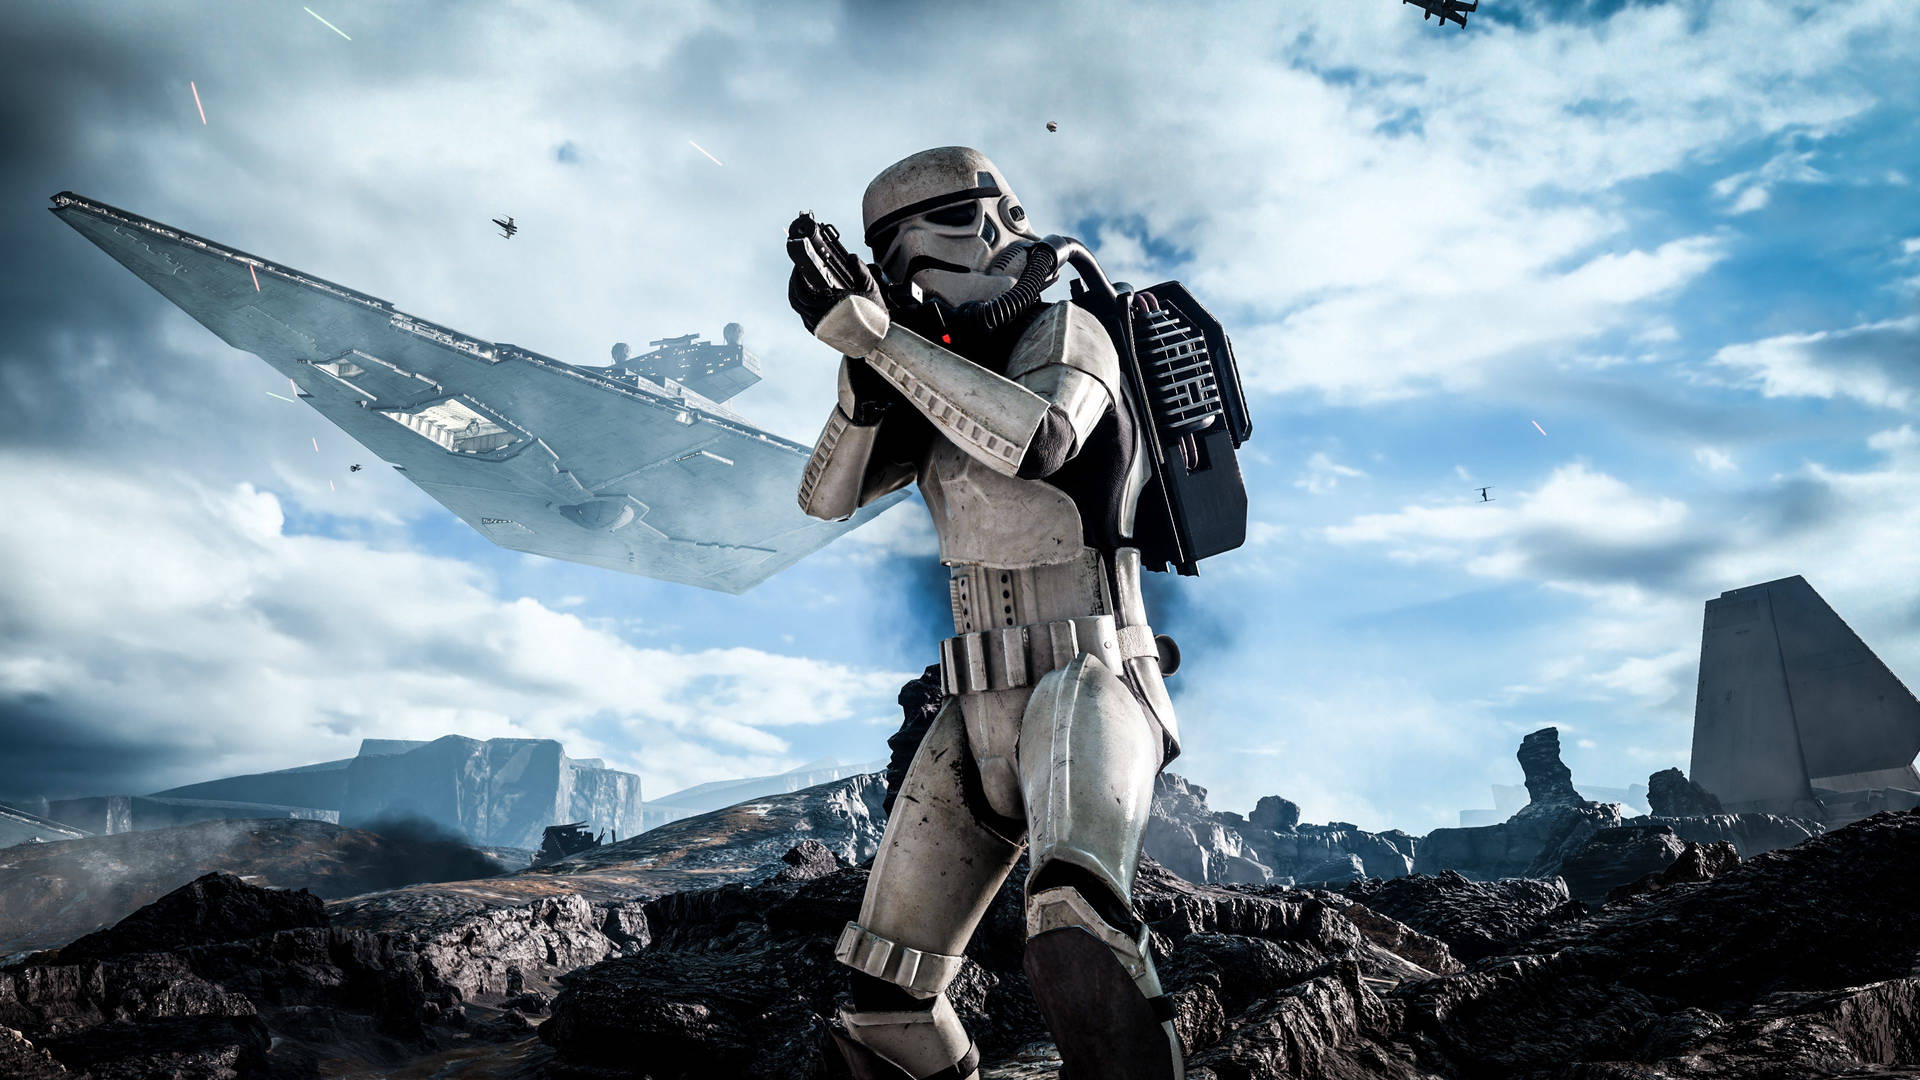 Shoot Out of a Stormtrooper from the Star Wars Universe Wallpaper